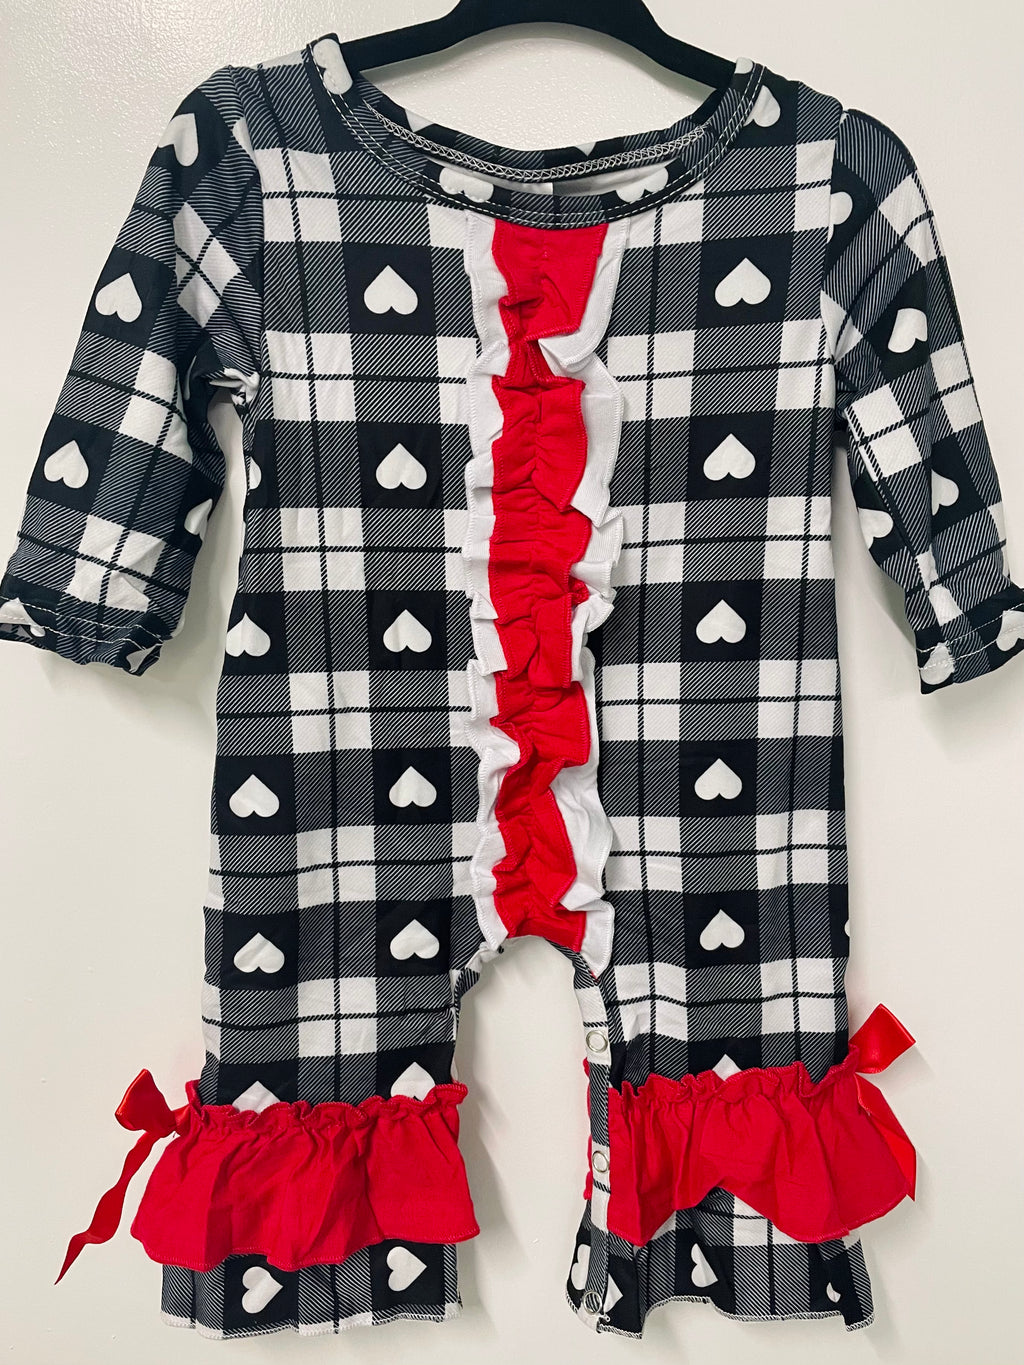 Baby Girl’s Black and White Plaid One Piece Heart Ruffle Outfit - Monogram Market